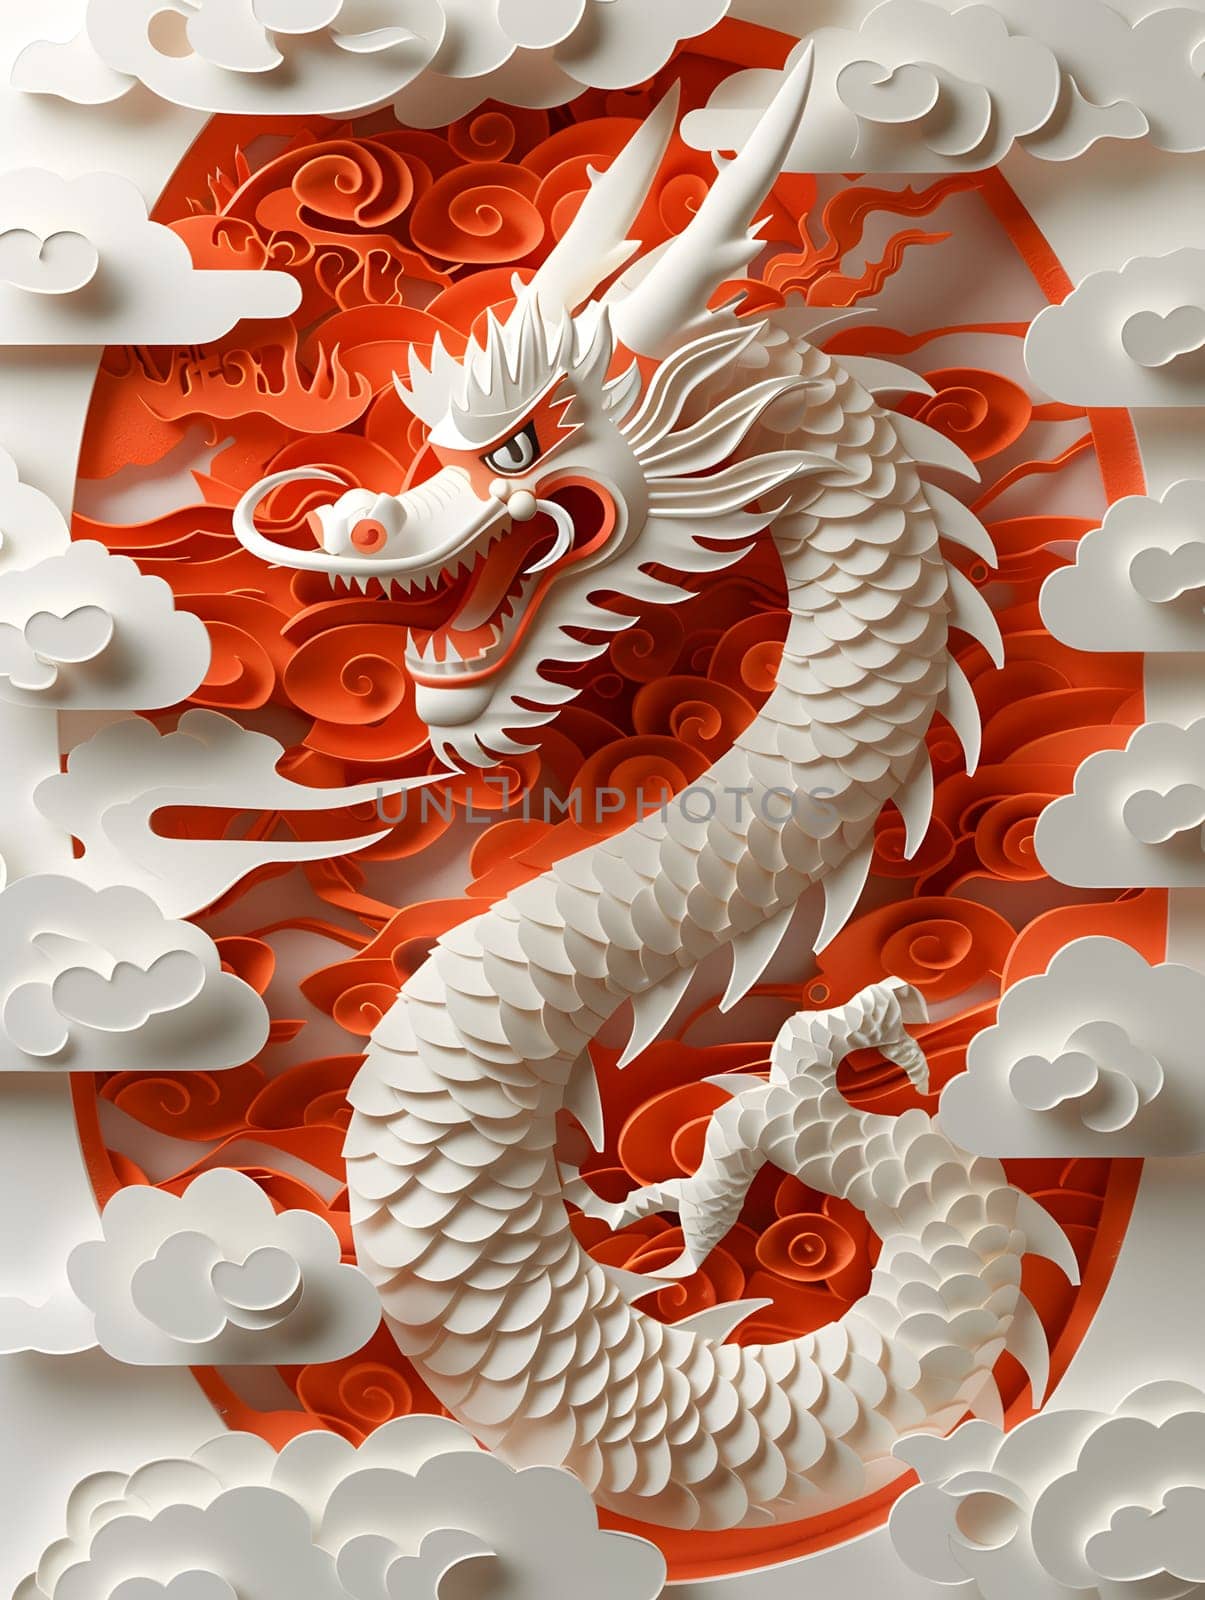 A white dragon encircled by red and white clouds, a mystical sight by Nadtochiy